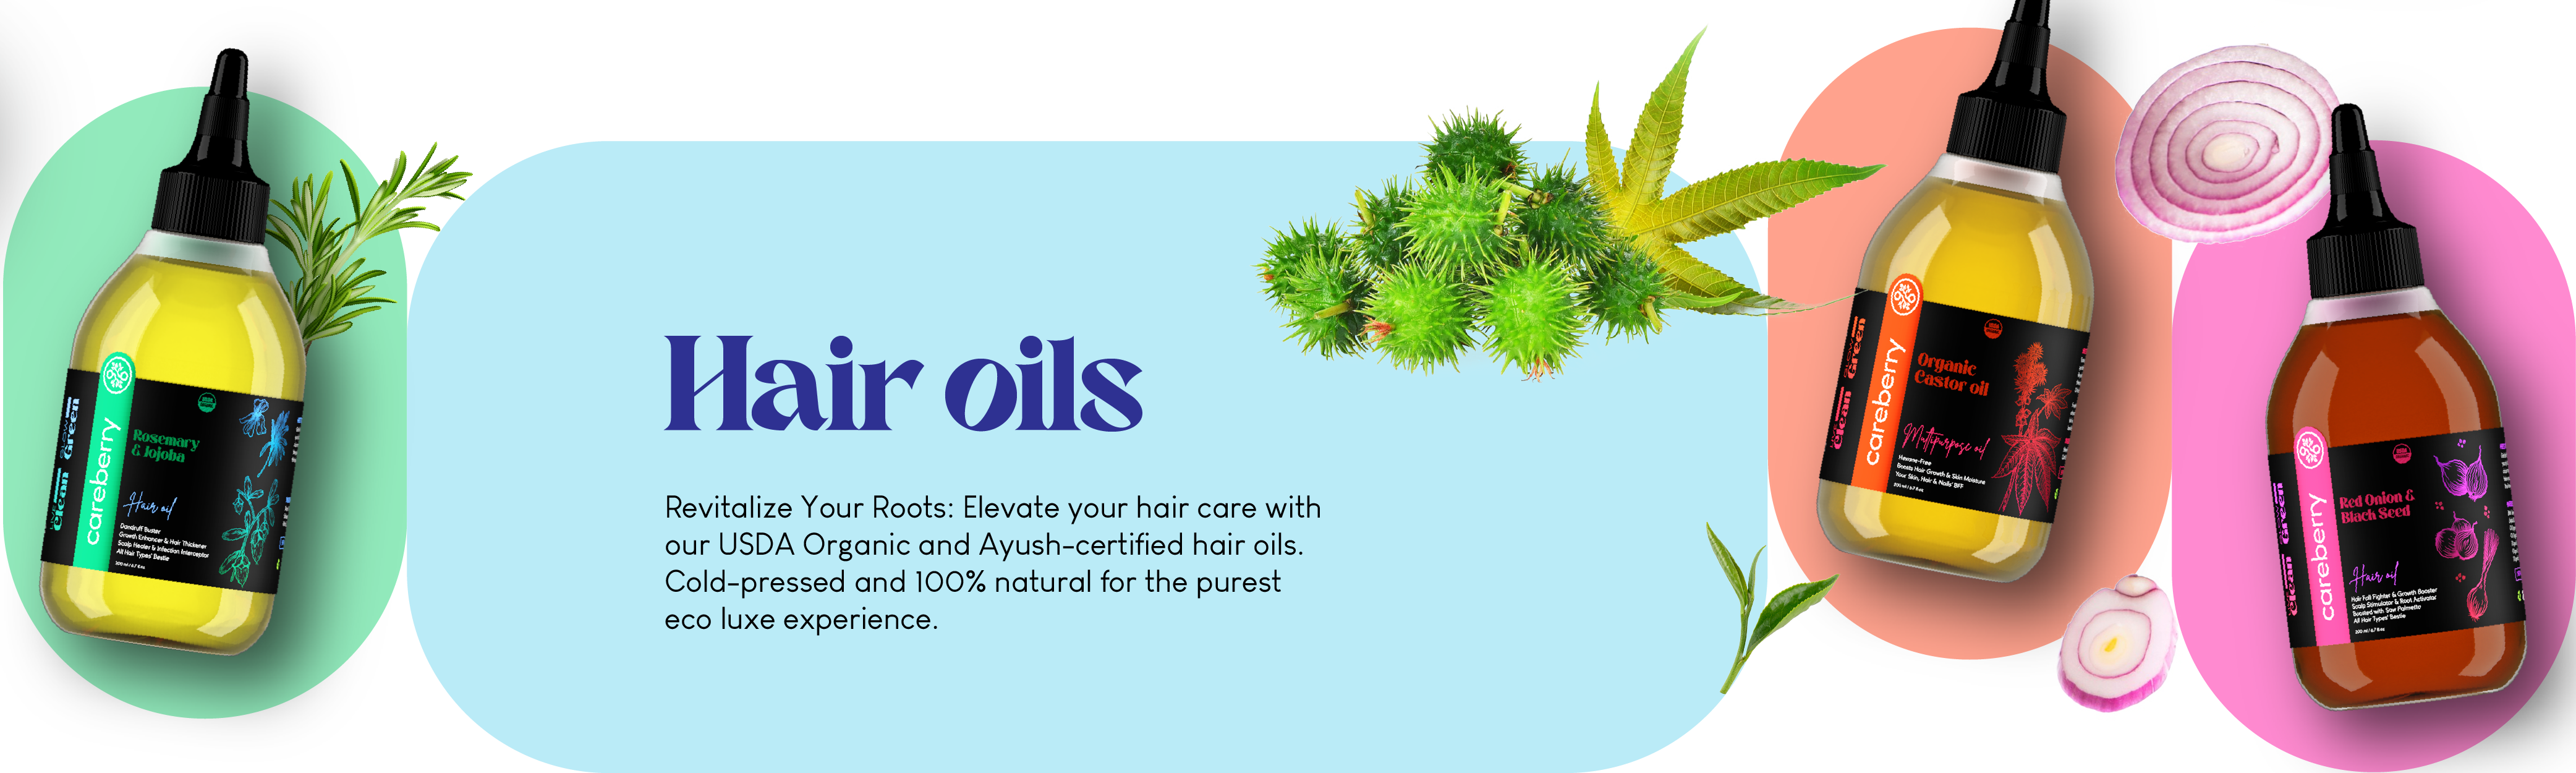 Keep your hairs nourished, lustrous and healthy by using the Best Ayurvedic & Natural Hair Care Products in Mumbai | Careberry